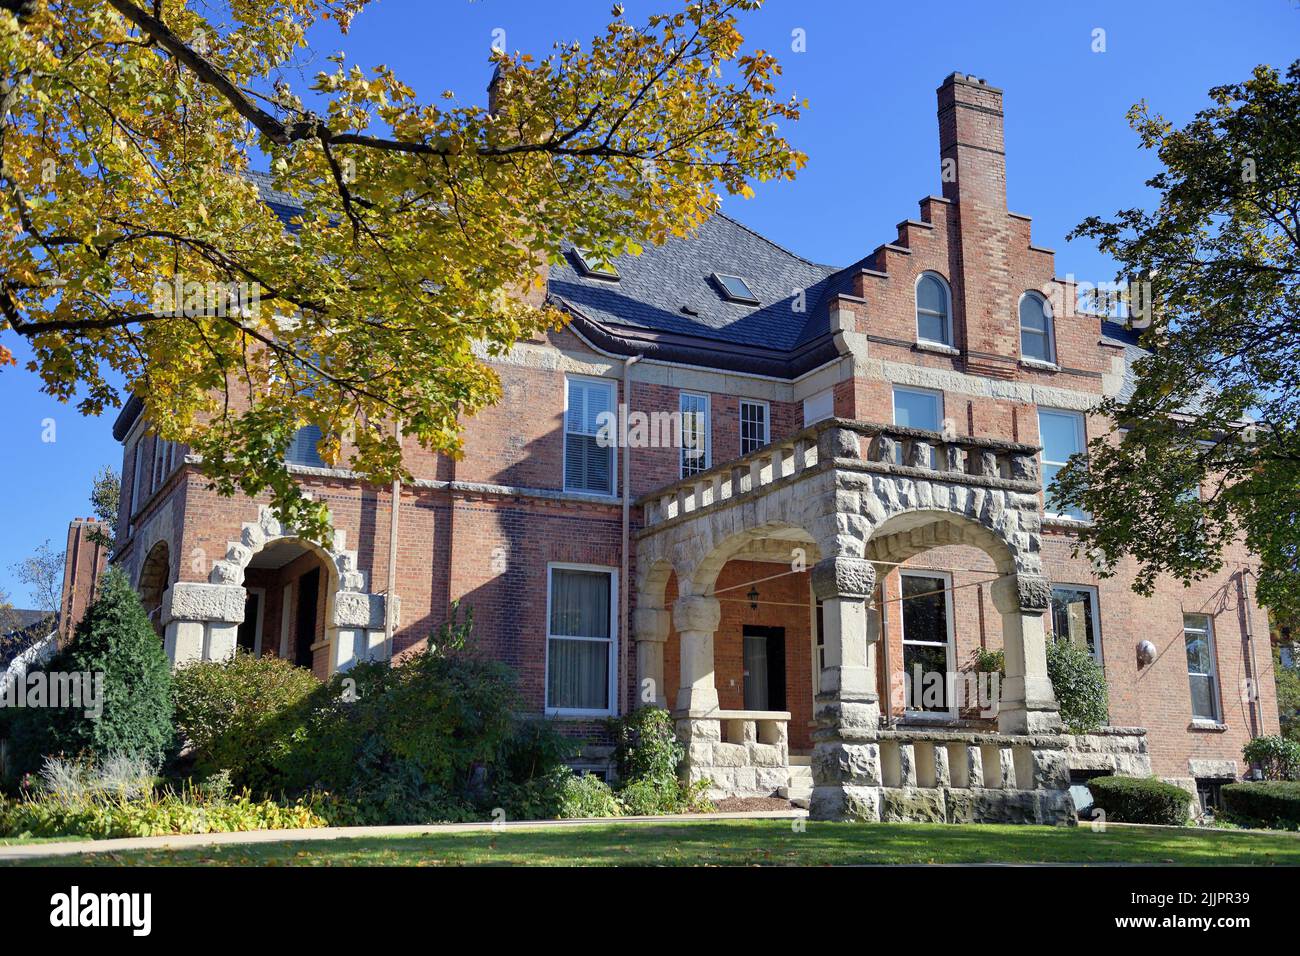 Hinsdale, Illinois, USA. Large mansion home in an upscale suburban Chicago setting. The structure represents a picture of wealthy living. Stock Photo